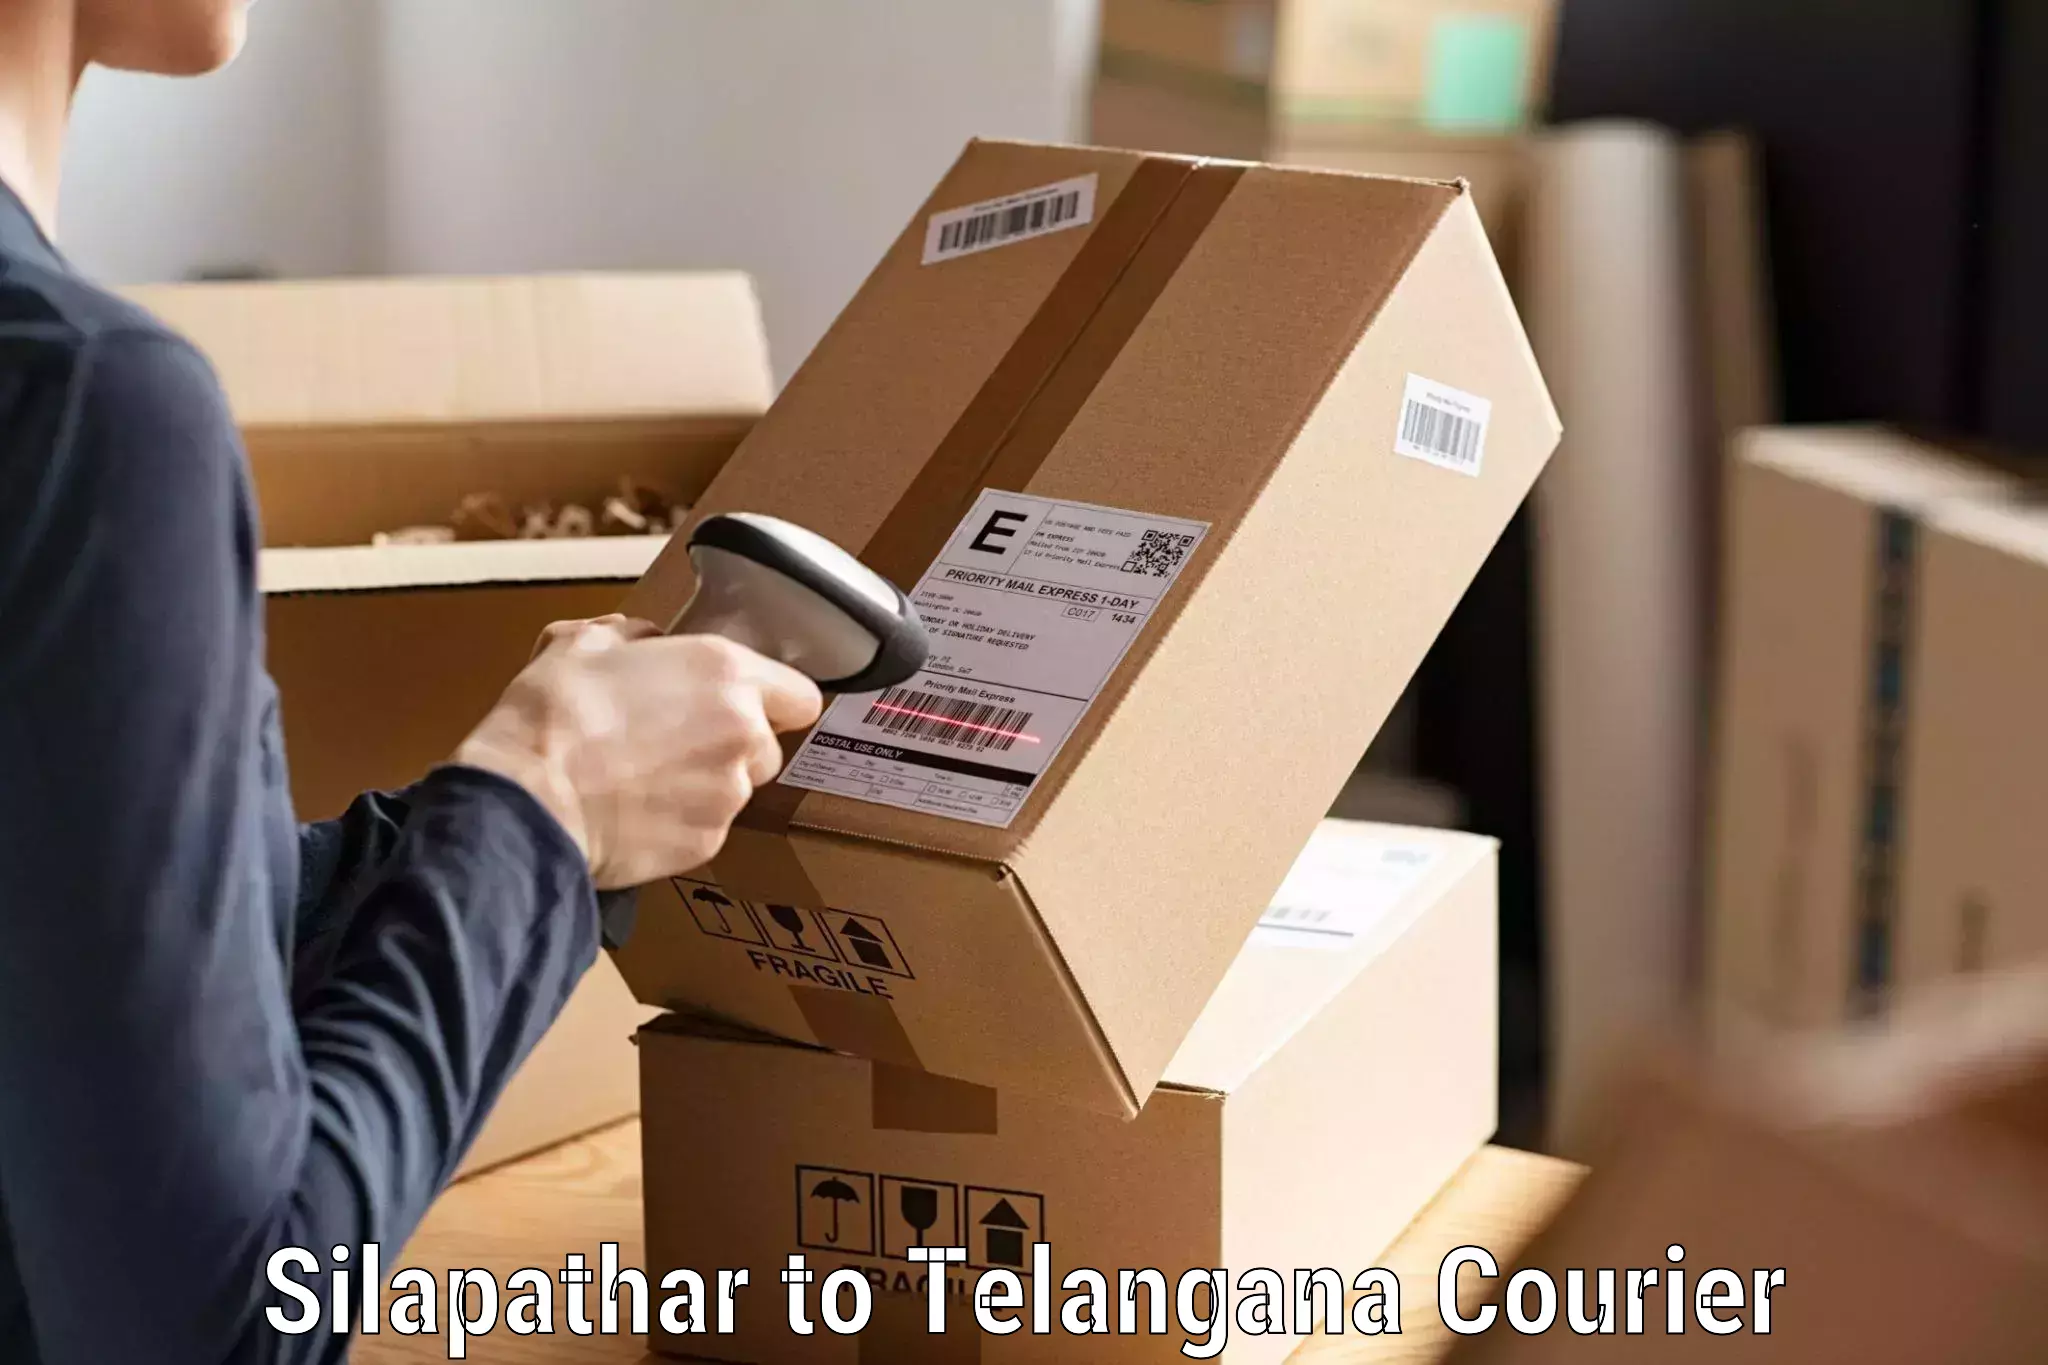 On-call courier service Silapathar to Mogulla Pally